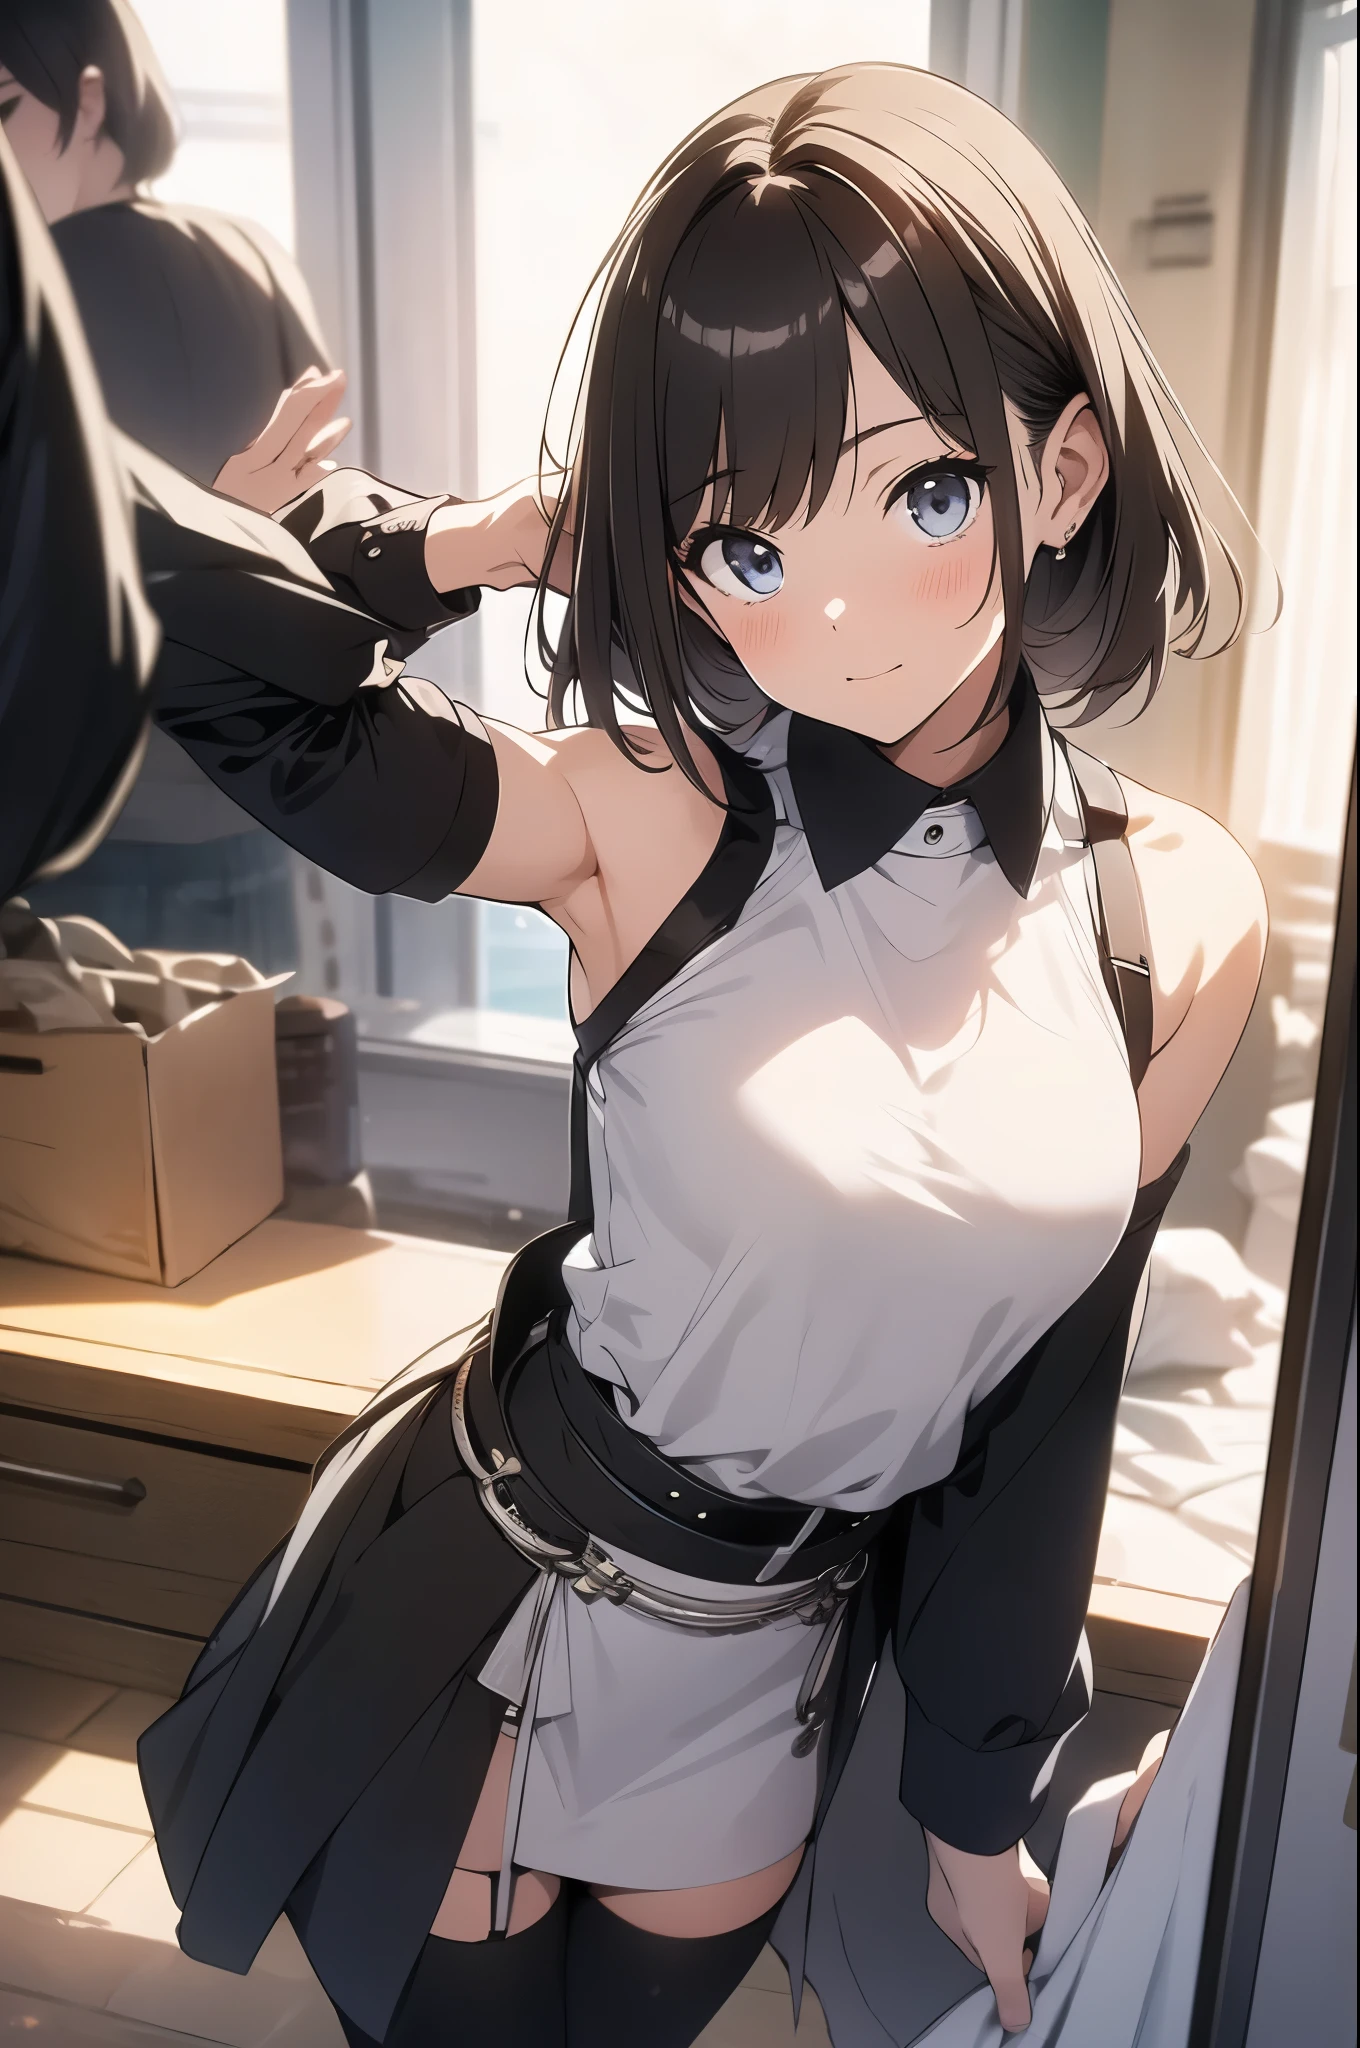 brown hair、looking at the viewer　　suspenders　　　Bulging big breasts　　 　 　　　　Black miniskirt　garter belt　knee high socks　　　　　　Gaze　　　small face　bangs 　　　　　Beauty　　hands up　　 　Gaze 　black boots 　provocation　　armpit sweat　one person 　　put your hands behind your back　cutter shirt　　Panty shot　ginka